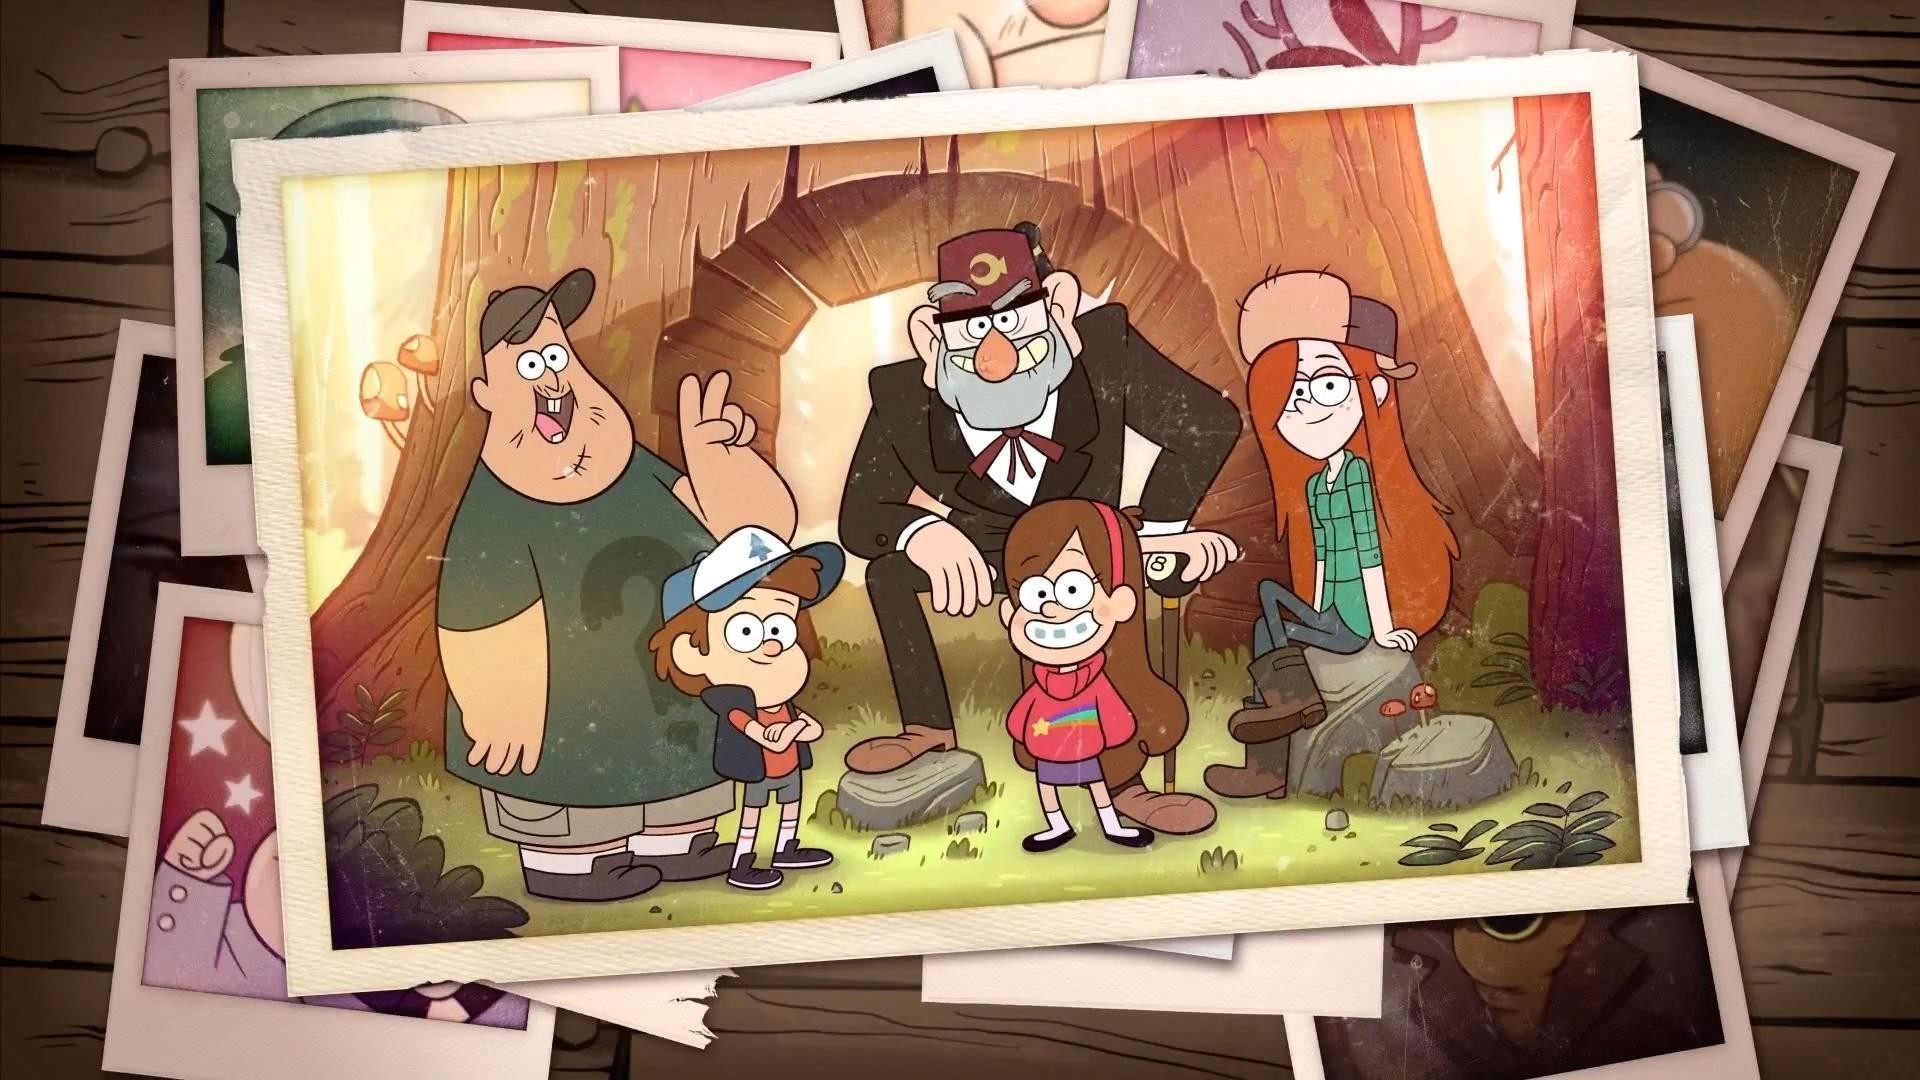 1920x1080 Wendy Mabel Pines Grunkle Stan Gravity Falls Dipper Pines 1080p HD Wallpaper  Background